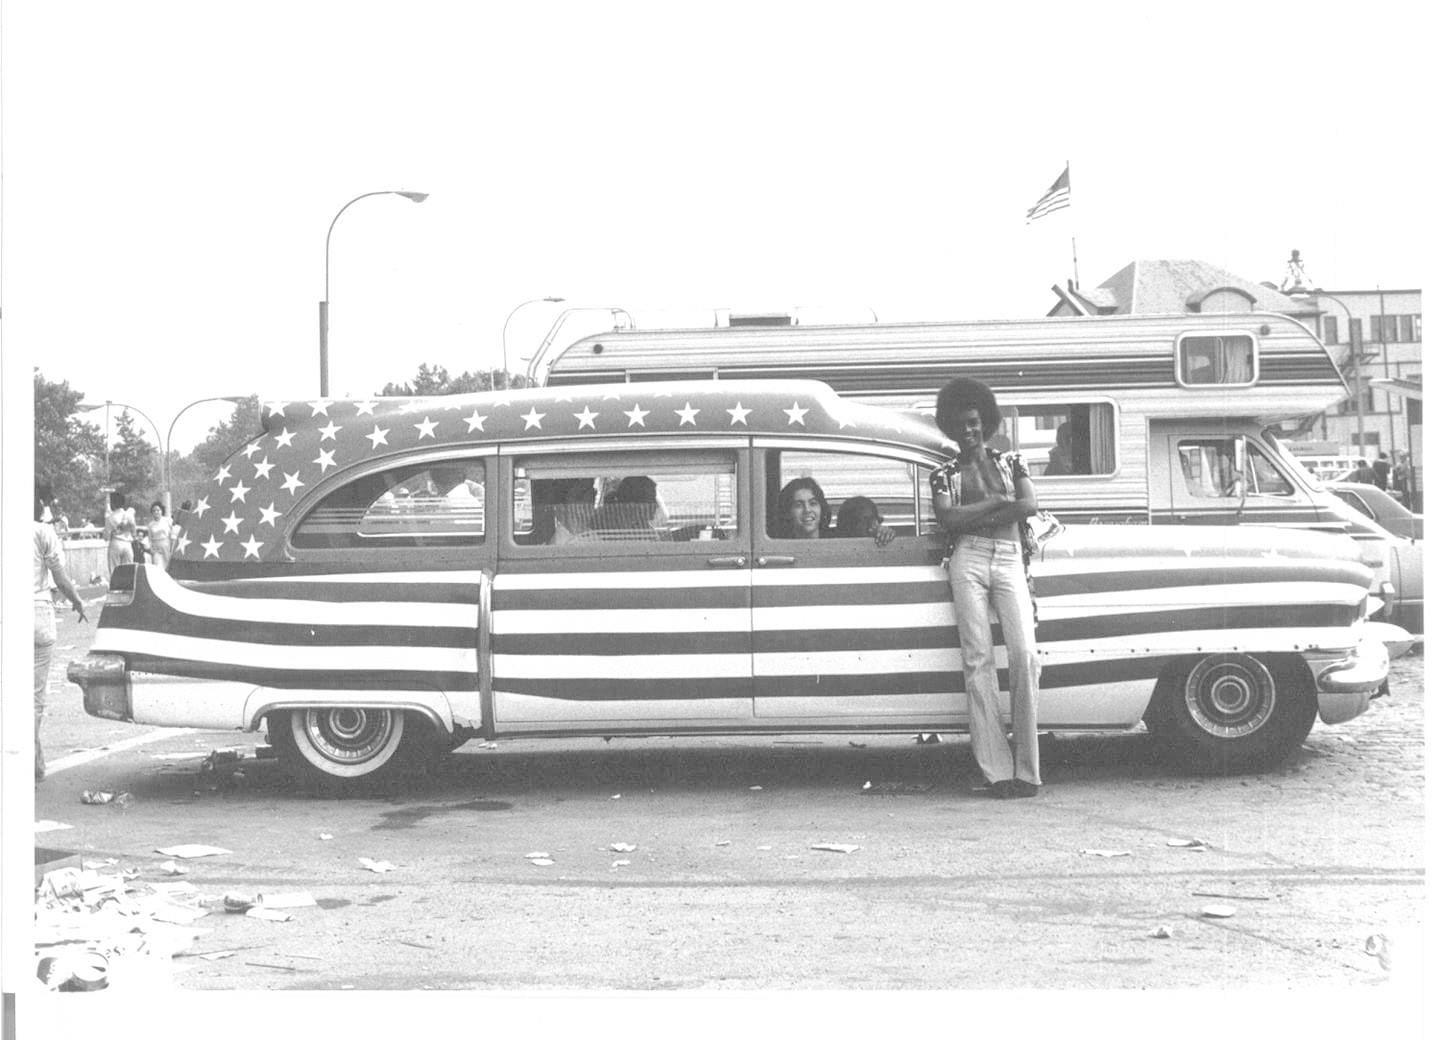 Hippies painted an old ambulance red, white & blue in honor of the Bicentennial Celebration at South Street Seaport, NYC (July 4, 1976). Photo by Sue Berg